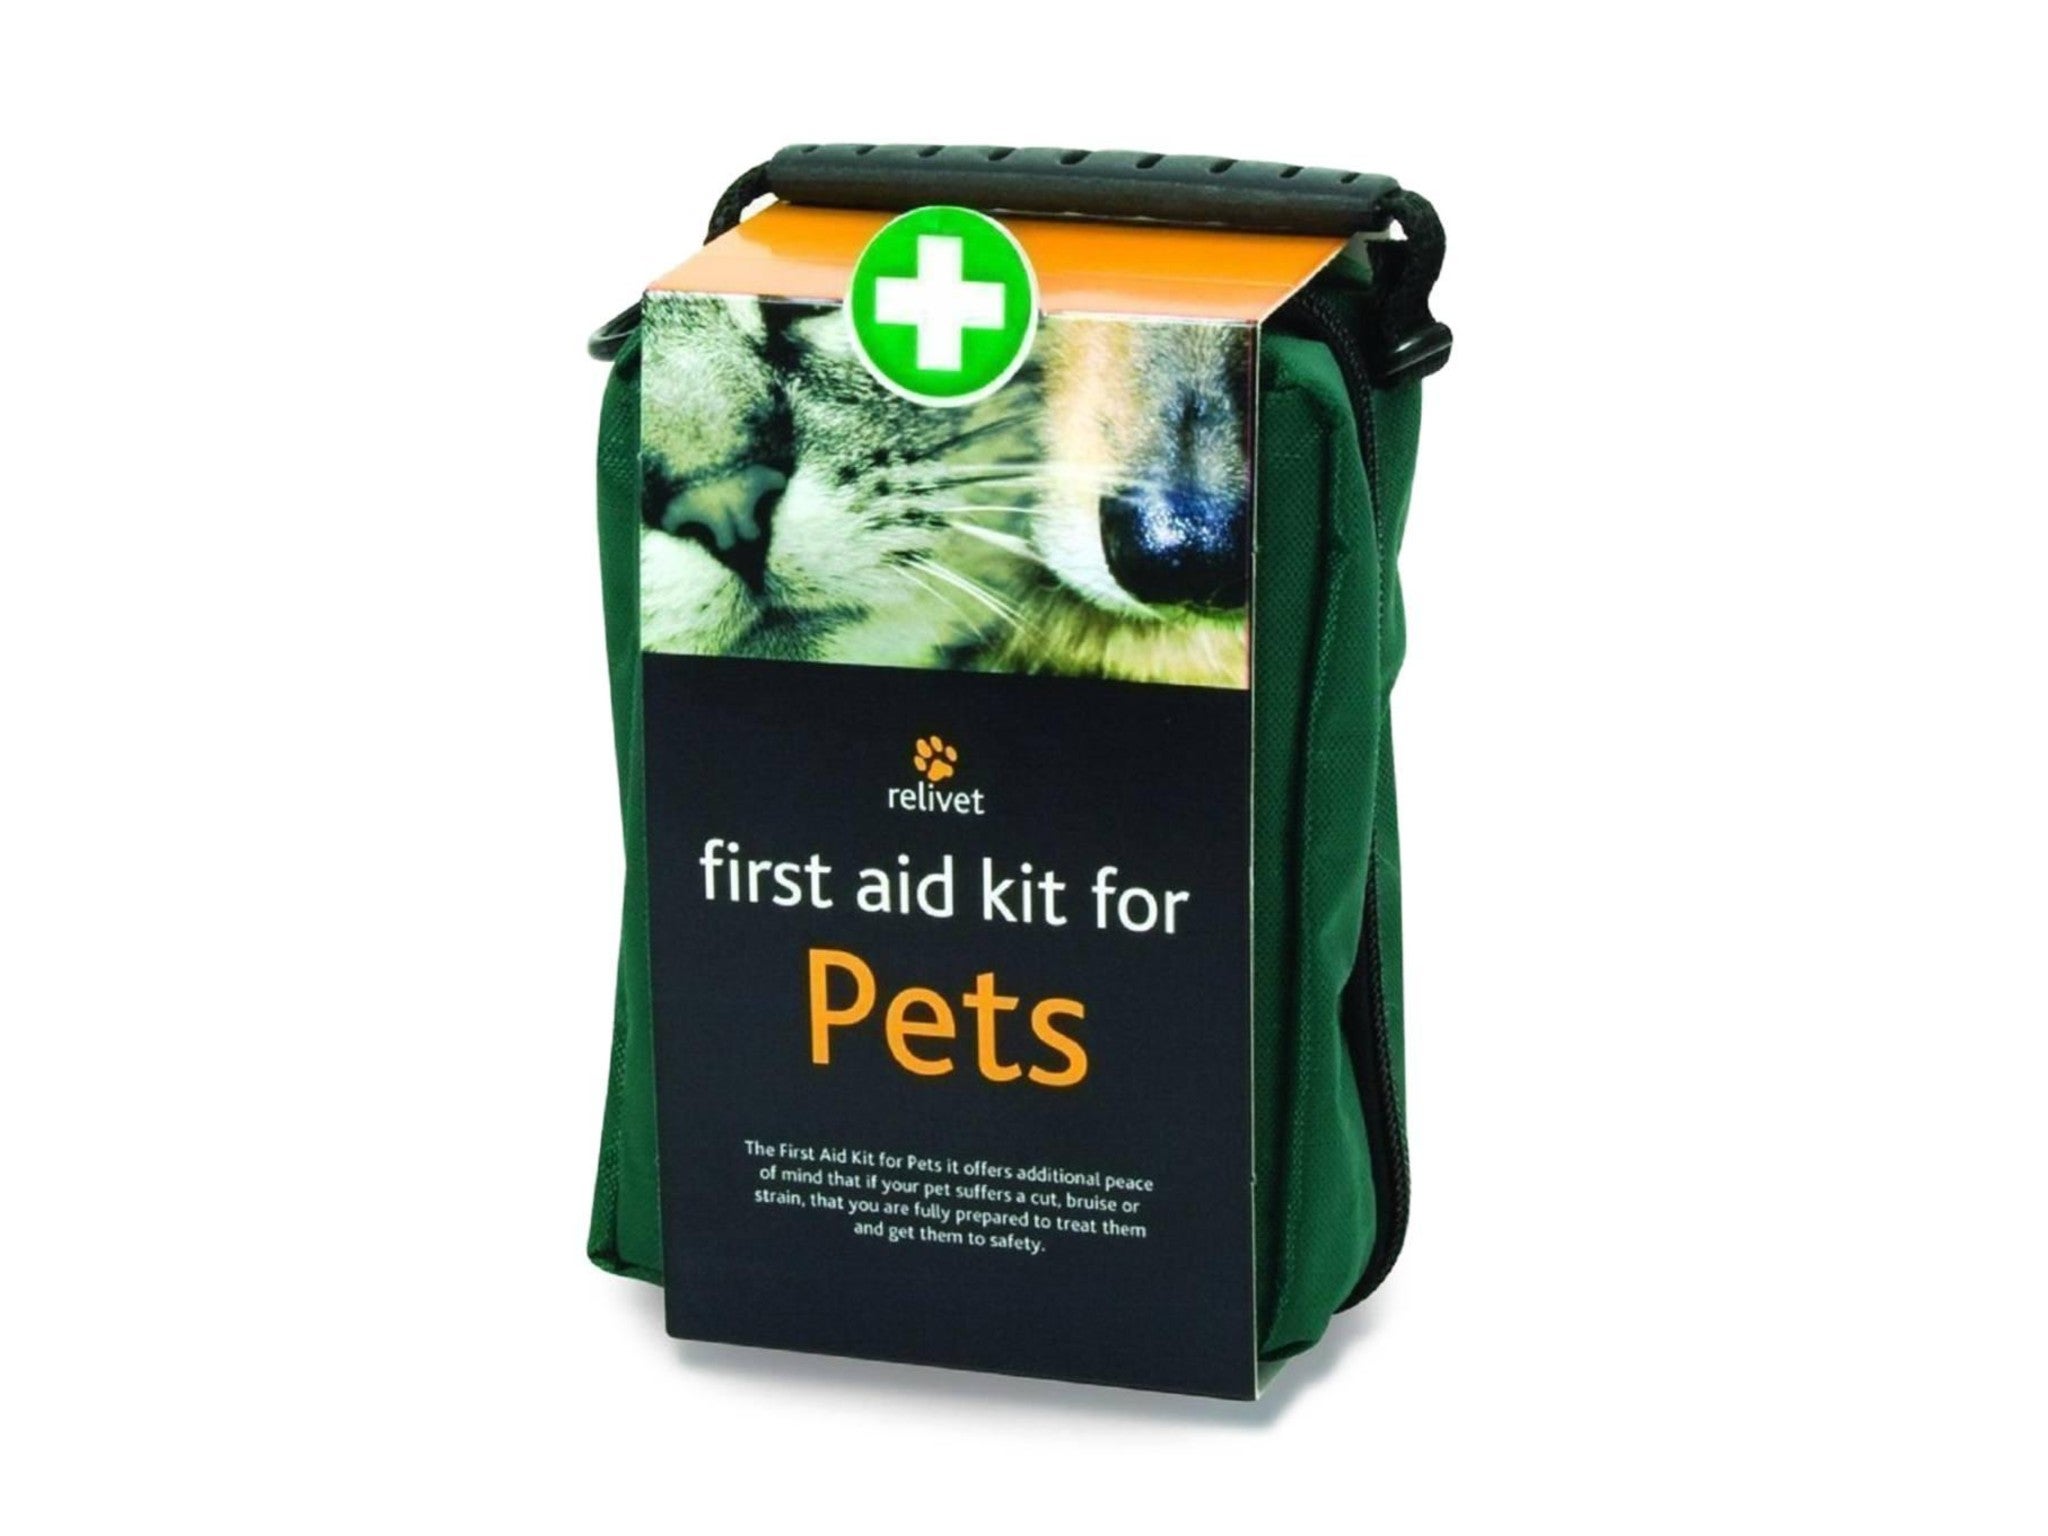 Relivet First Aid Kits for Pets indybest.jpg